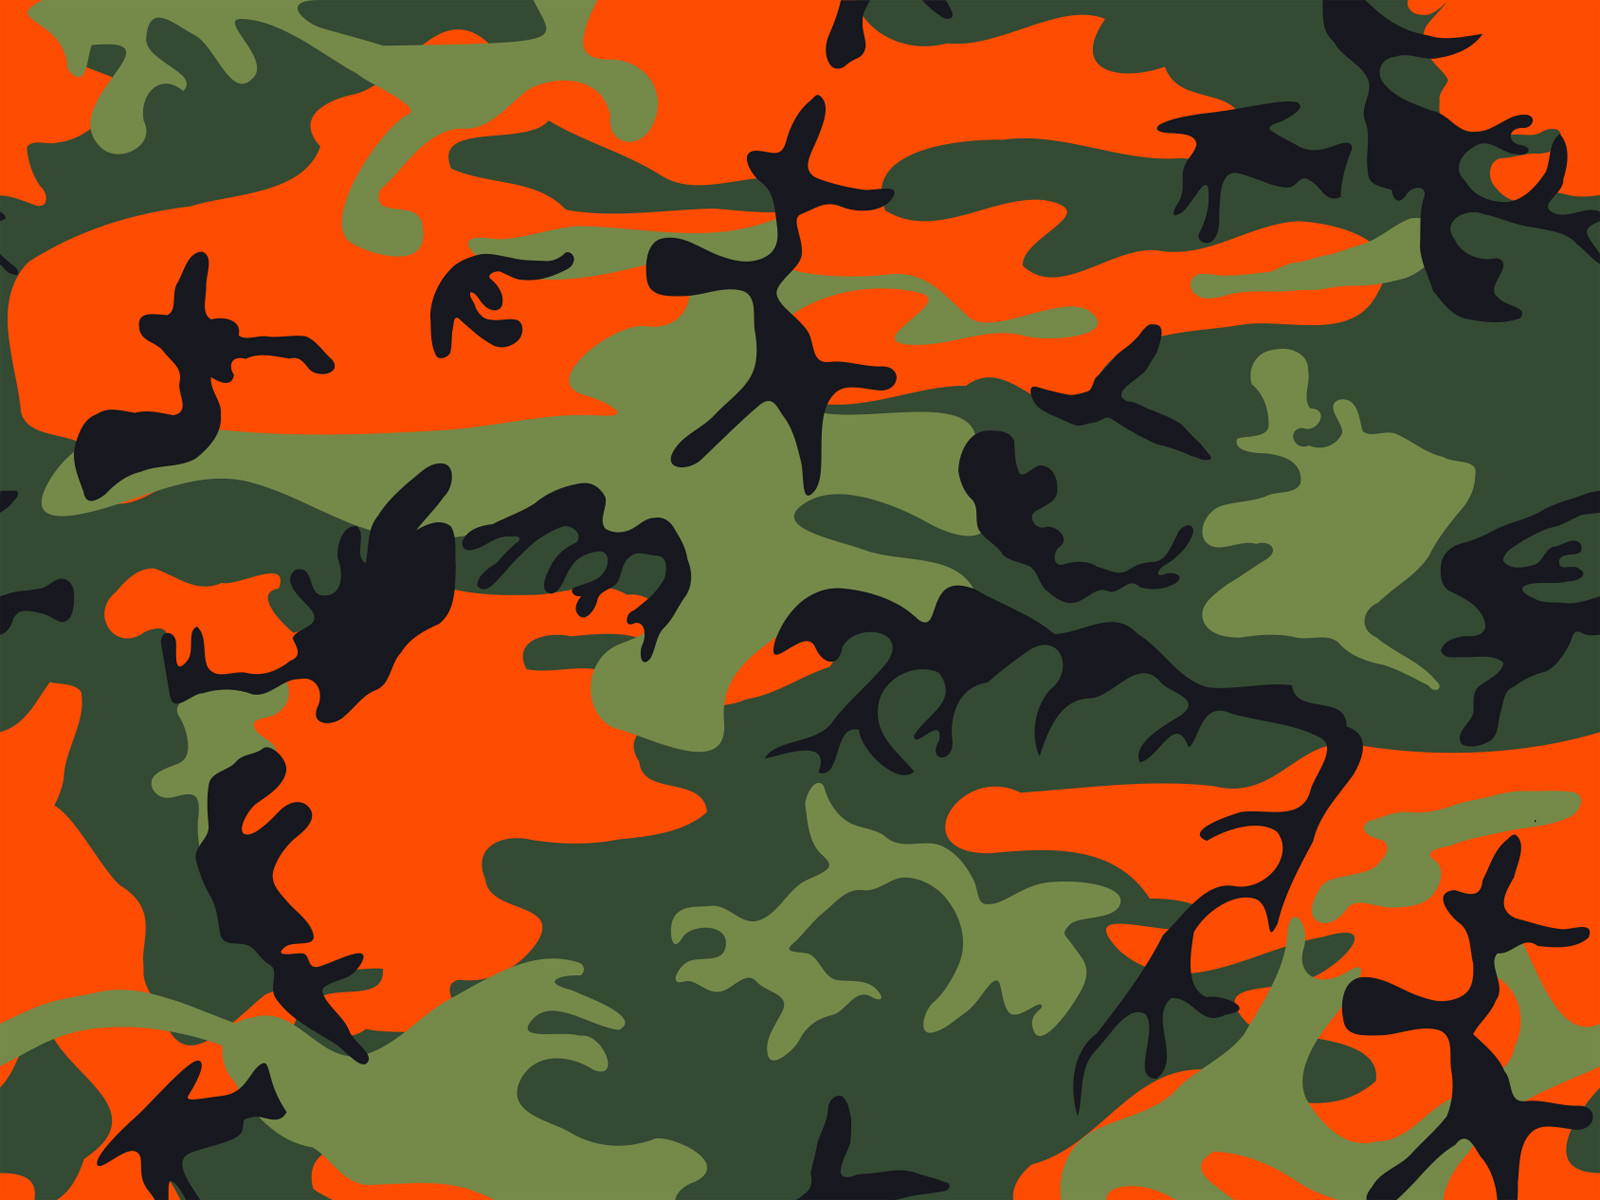 Camouflage Backgrounds